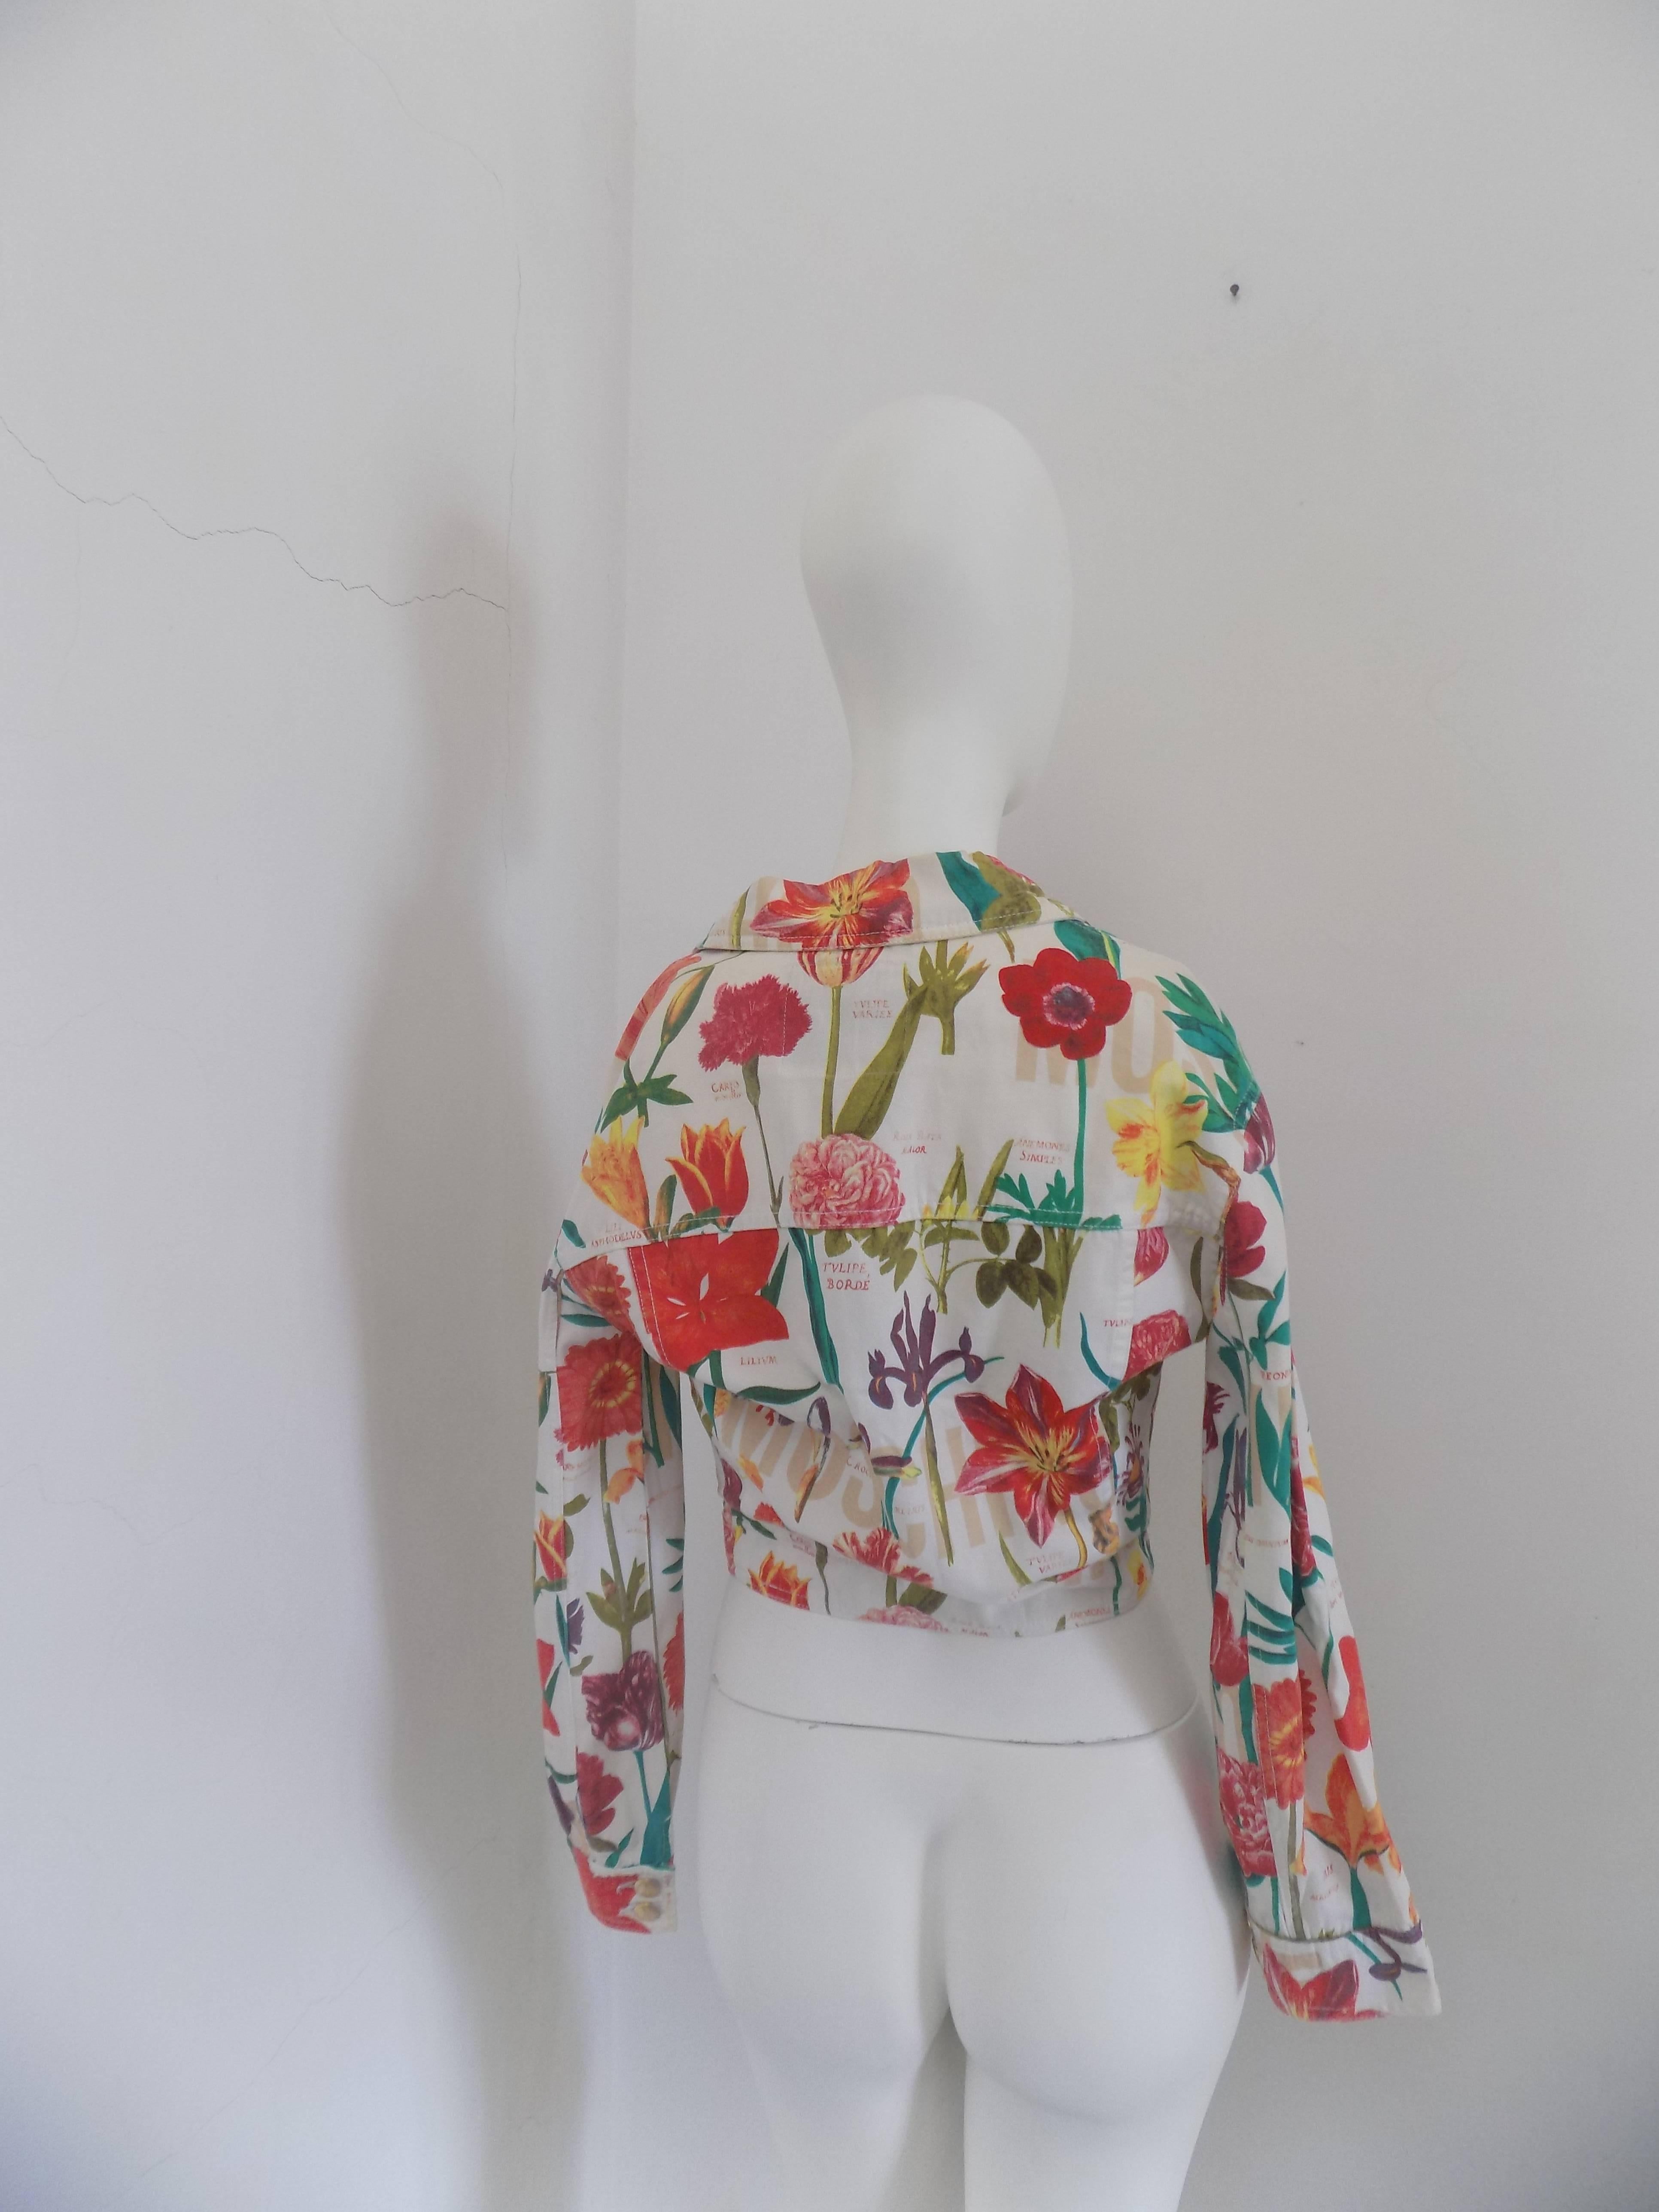 Moschino Multitone Jacket In Excellent Condition For Sale In Capri, IT